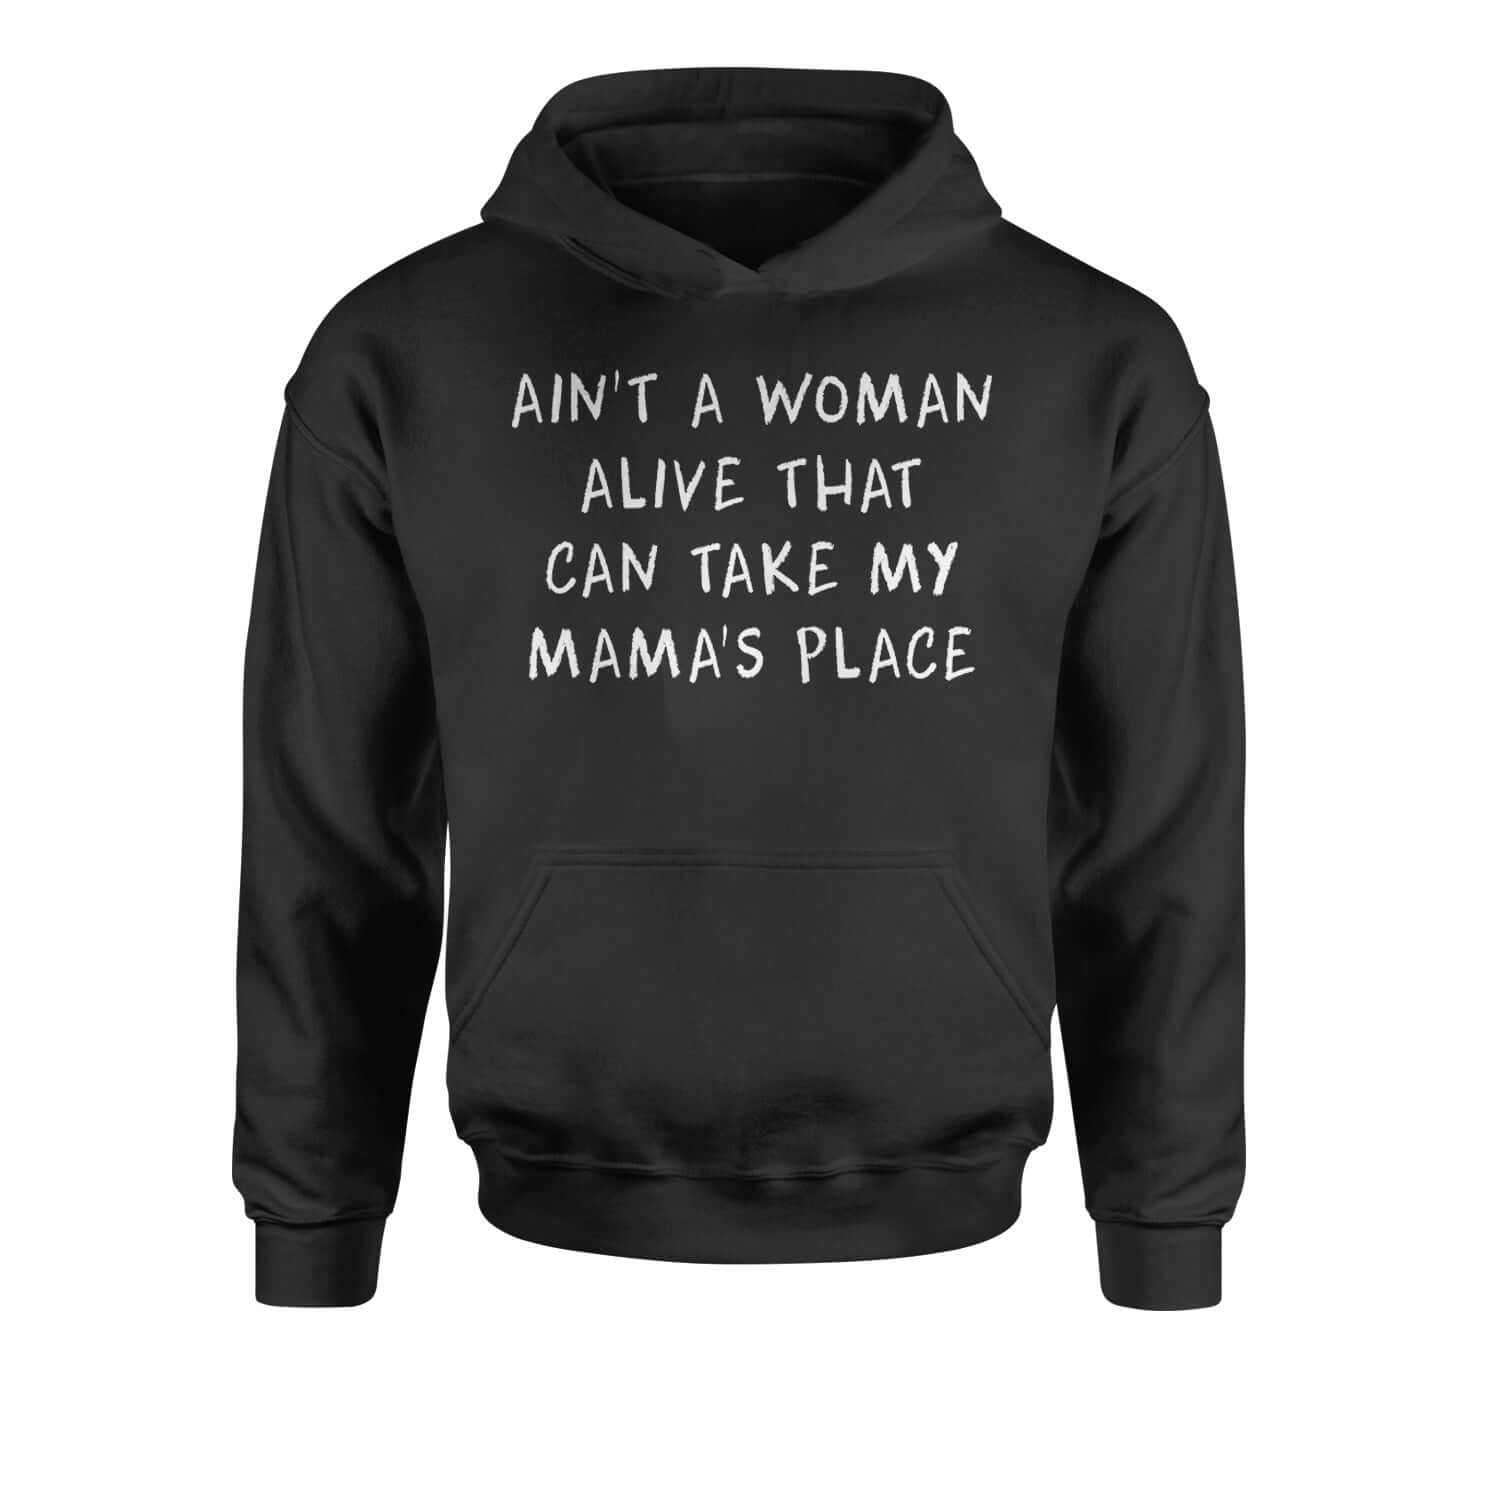 Ain't A Woman Alive That Can Take My Mama's Place Youth-Sized Hoodie 2pac, bear, day, mama, mom, mothers, shakur, tupac by Expression Tees